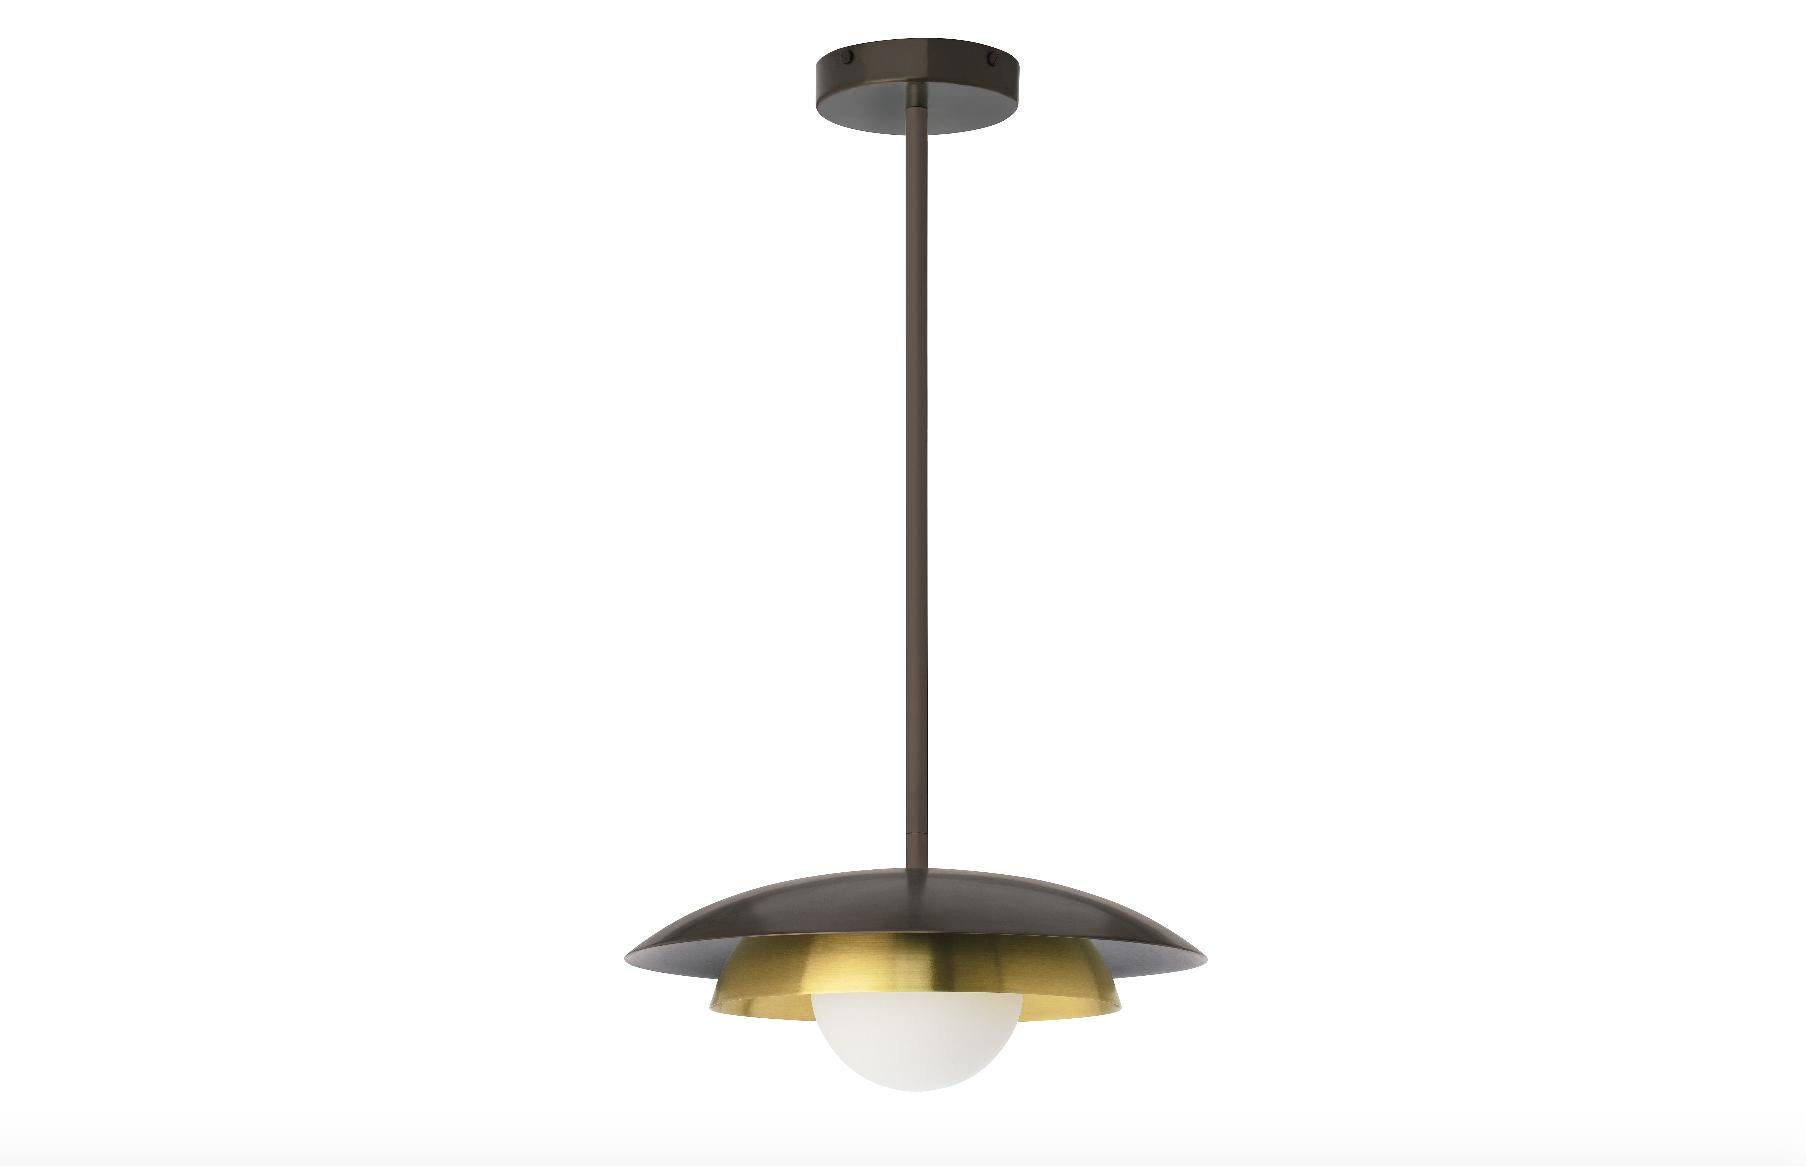 Carapace pendant lamp by CTO Lighting
Materials: bronze with satin brass, opal glass shade and bronze drop rod
Dimensions: H 15 x W 32 cm

All our lamps can be wired according to each country. If sold to the USA it will be wired for the USA for